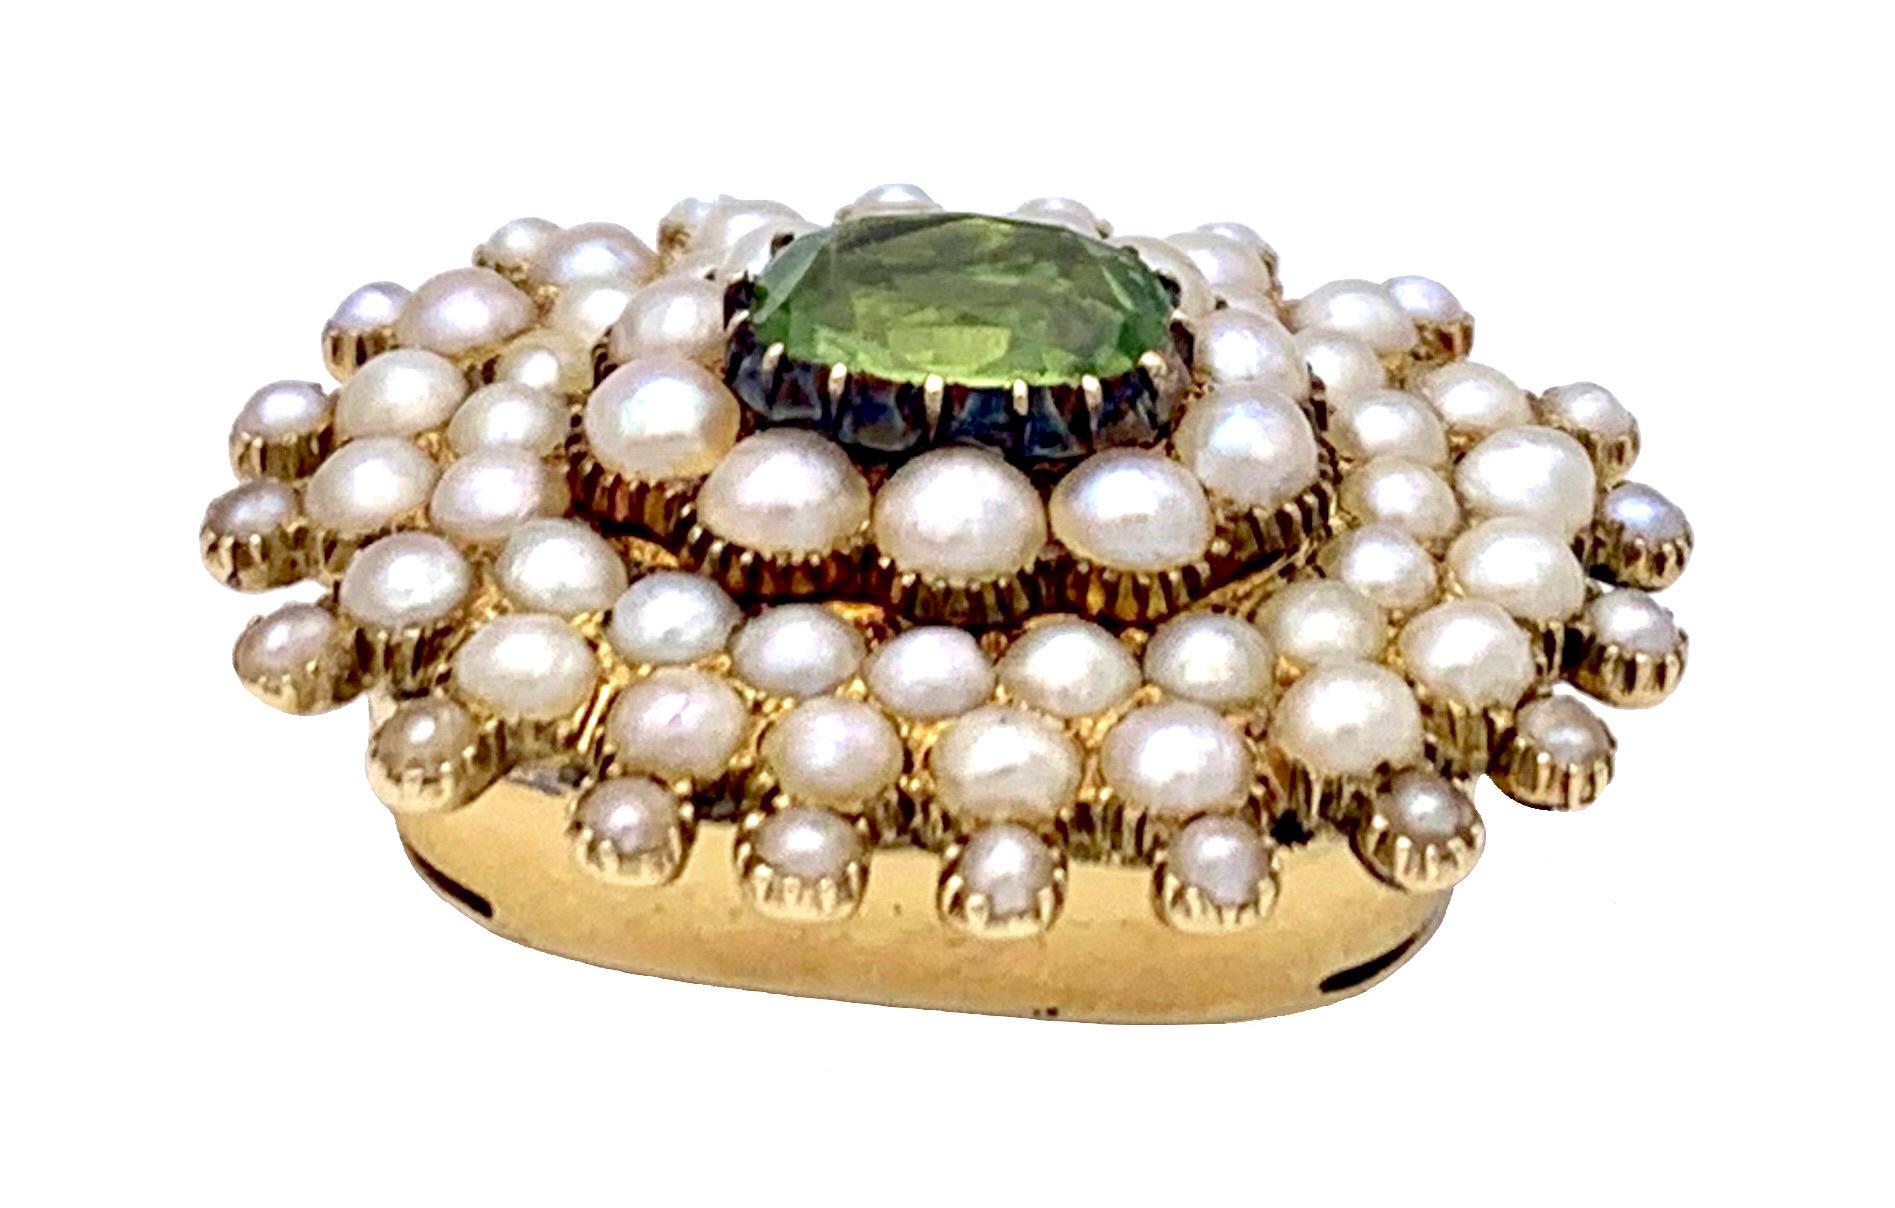 This precious clasp designed as a starburst was intended for a bracelet or a necklace, most likely to be worn with pearls.  The oval fasetted peridot has been set in a silver setting with golden claws and then mounted onto the golden clasp together